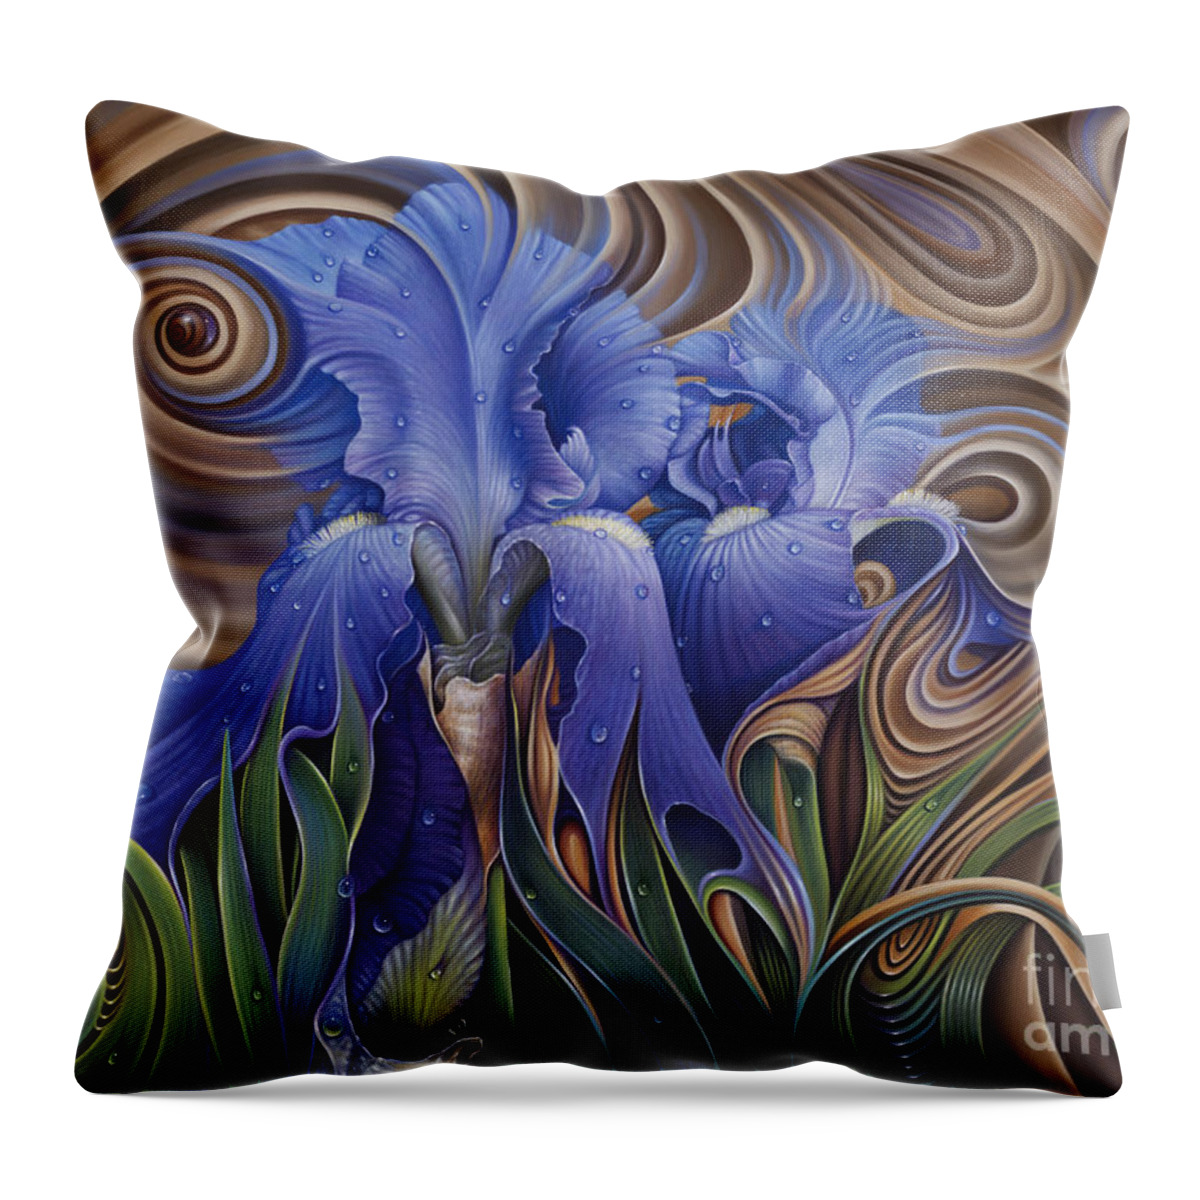 Flower Throw Pillow featuring the painting Dynamic Iris by Ricardo Chavez-Mendez